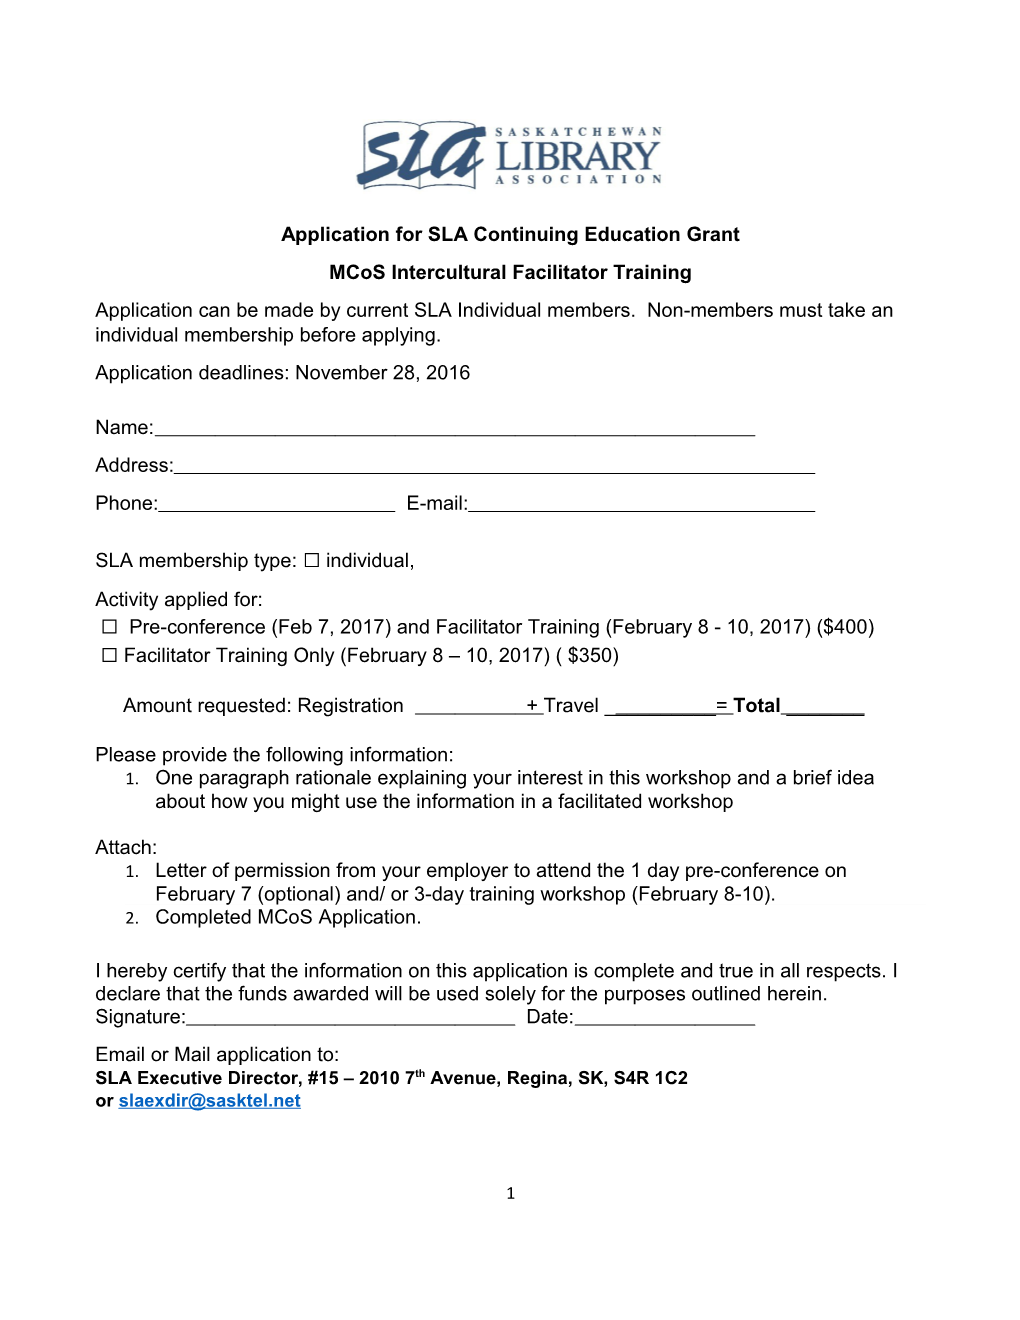 Application for SLA Continuing Education Grant